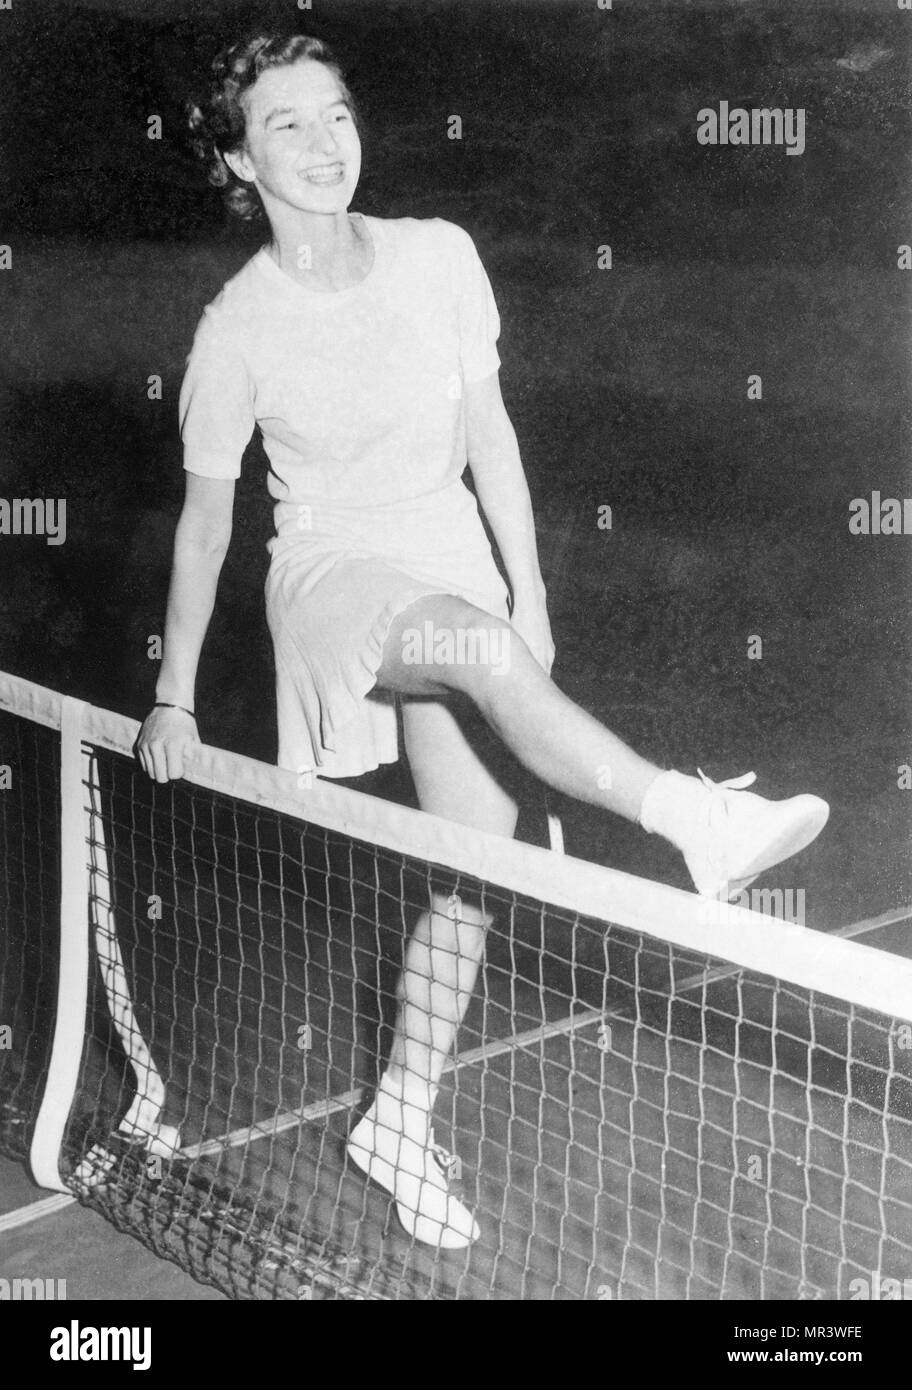 Mary Hardwick, English tennis player (8 September 1913 – 18 December 2001) The first English tennis player to turn professional. Image taken at Madison Square Garden in New York on 9th January 1941. Stock Photo